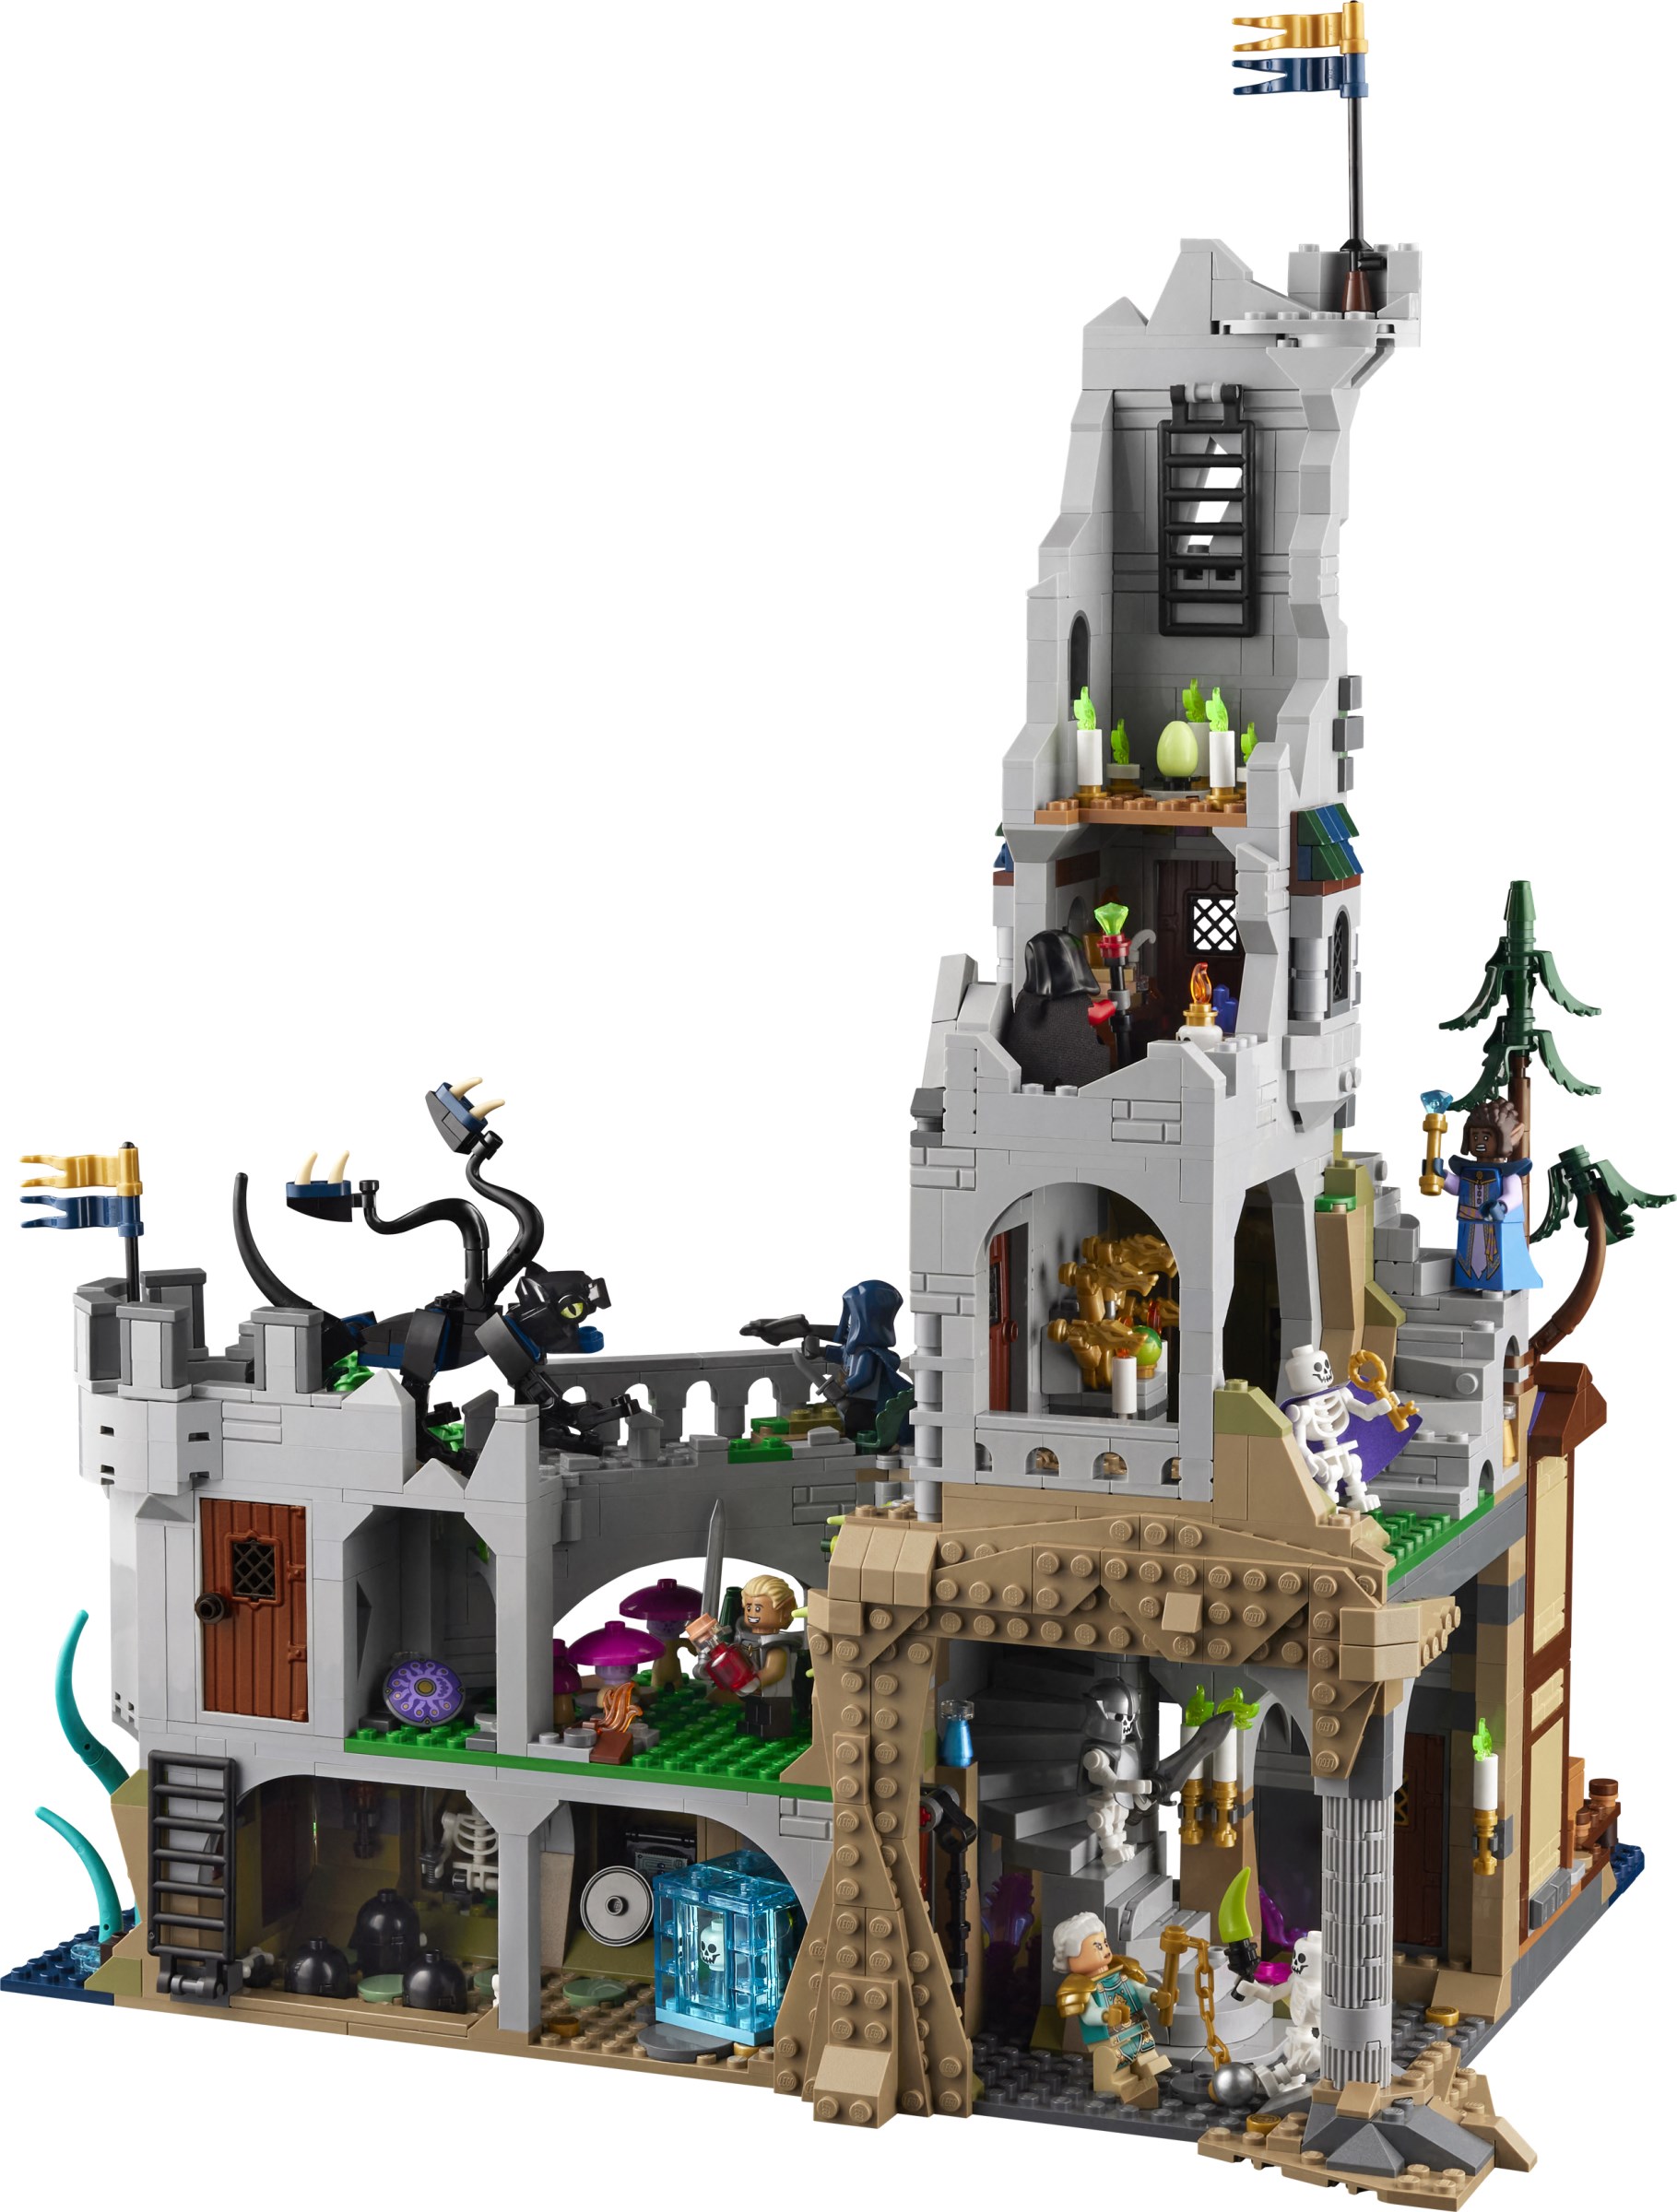 LEGO Dungeons & Dragons unveiled!